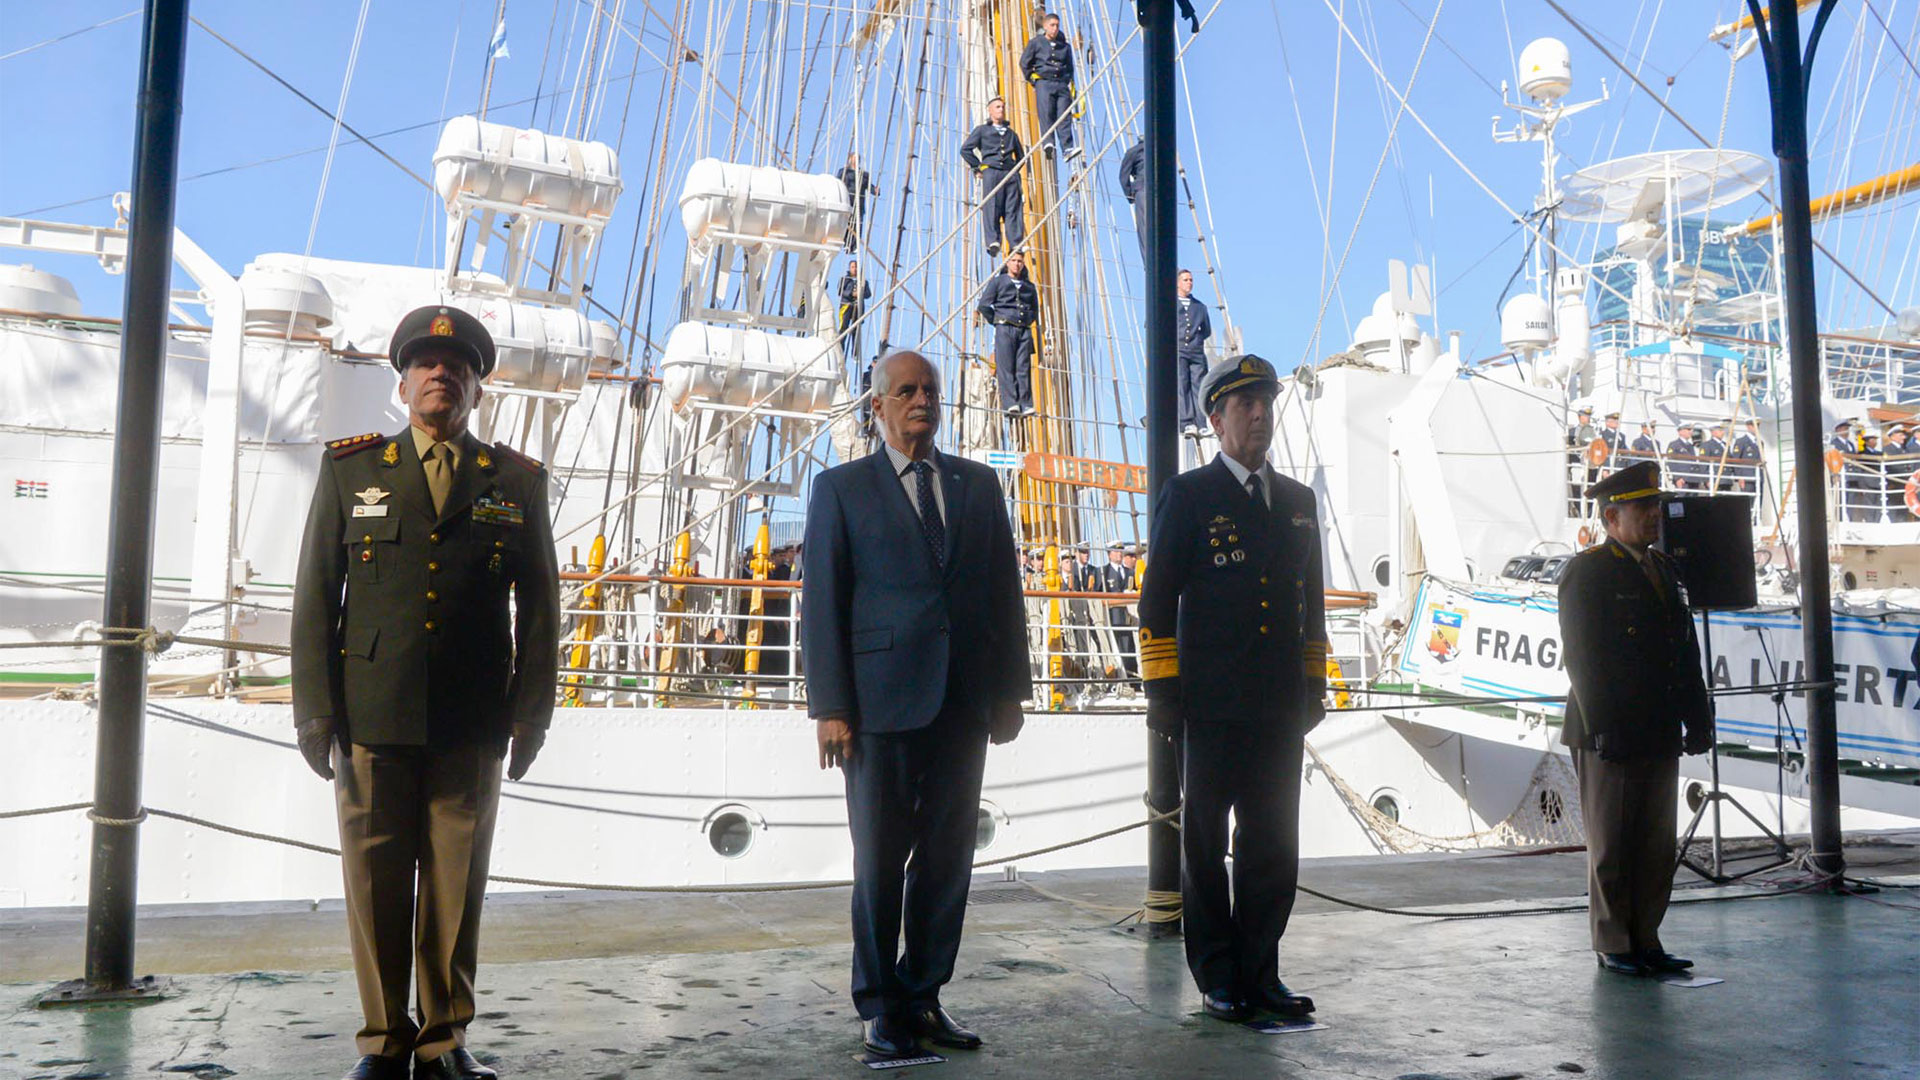 Alongside the highest military authorities of the country and a large group of foreign diplomats, the Minister of Defense justified the choice of the ports that will touch 